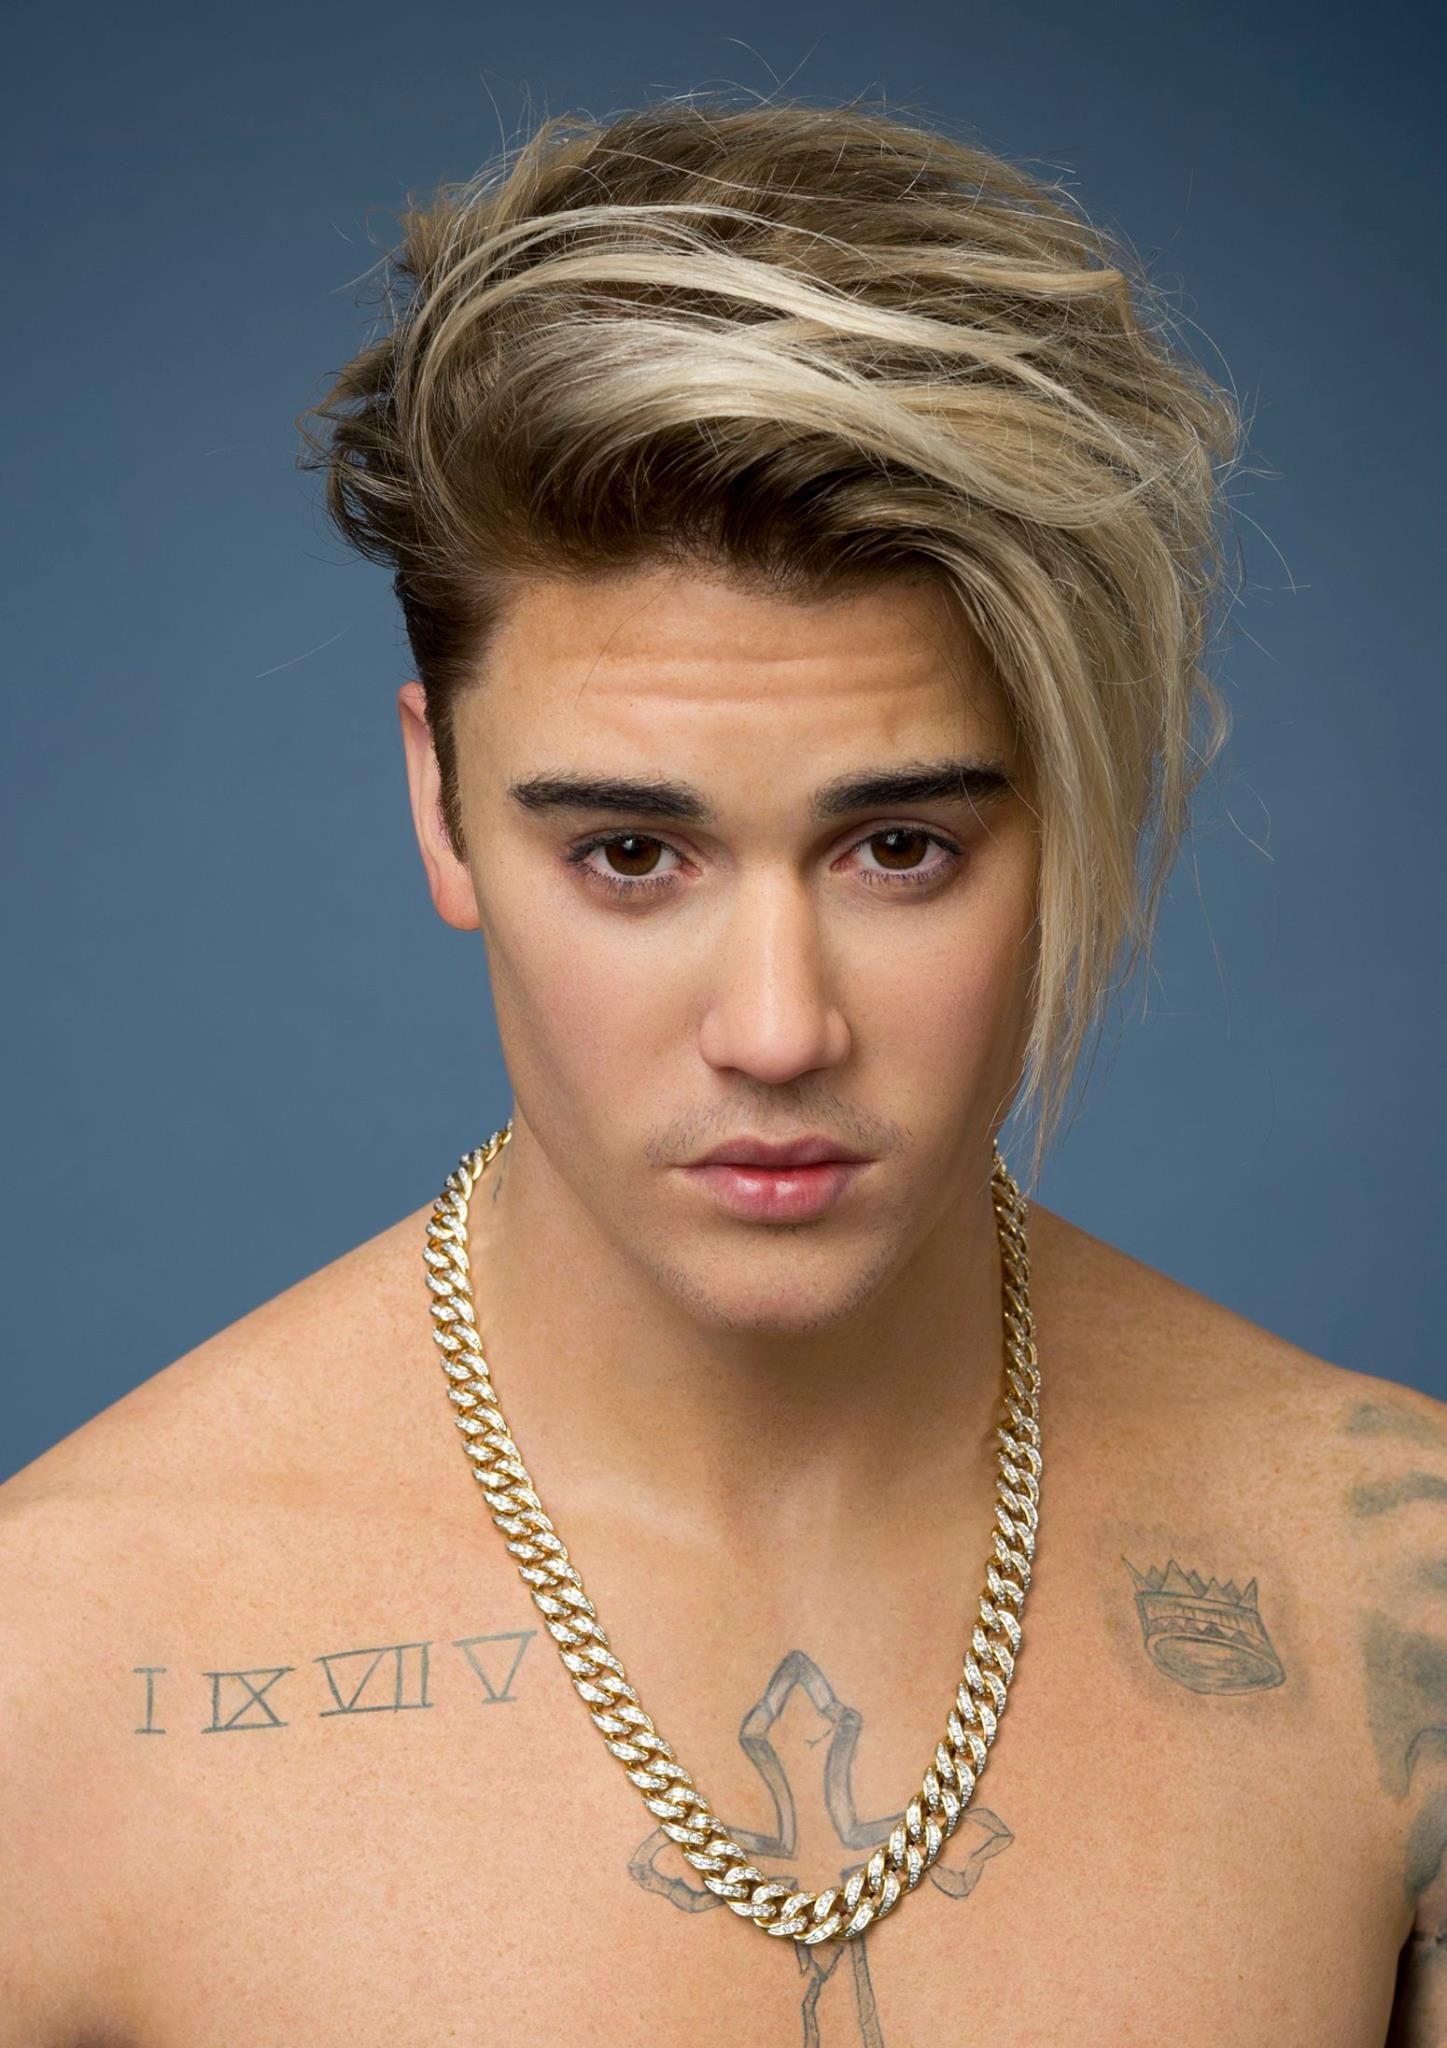 Are You Sexually Attracted to This Justin Bieber Waxwork?